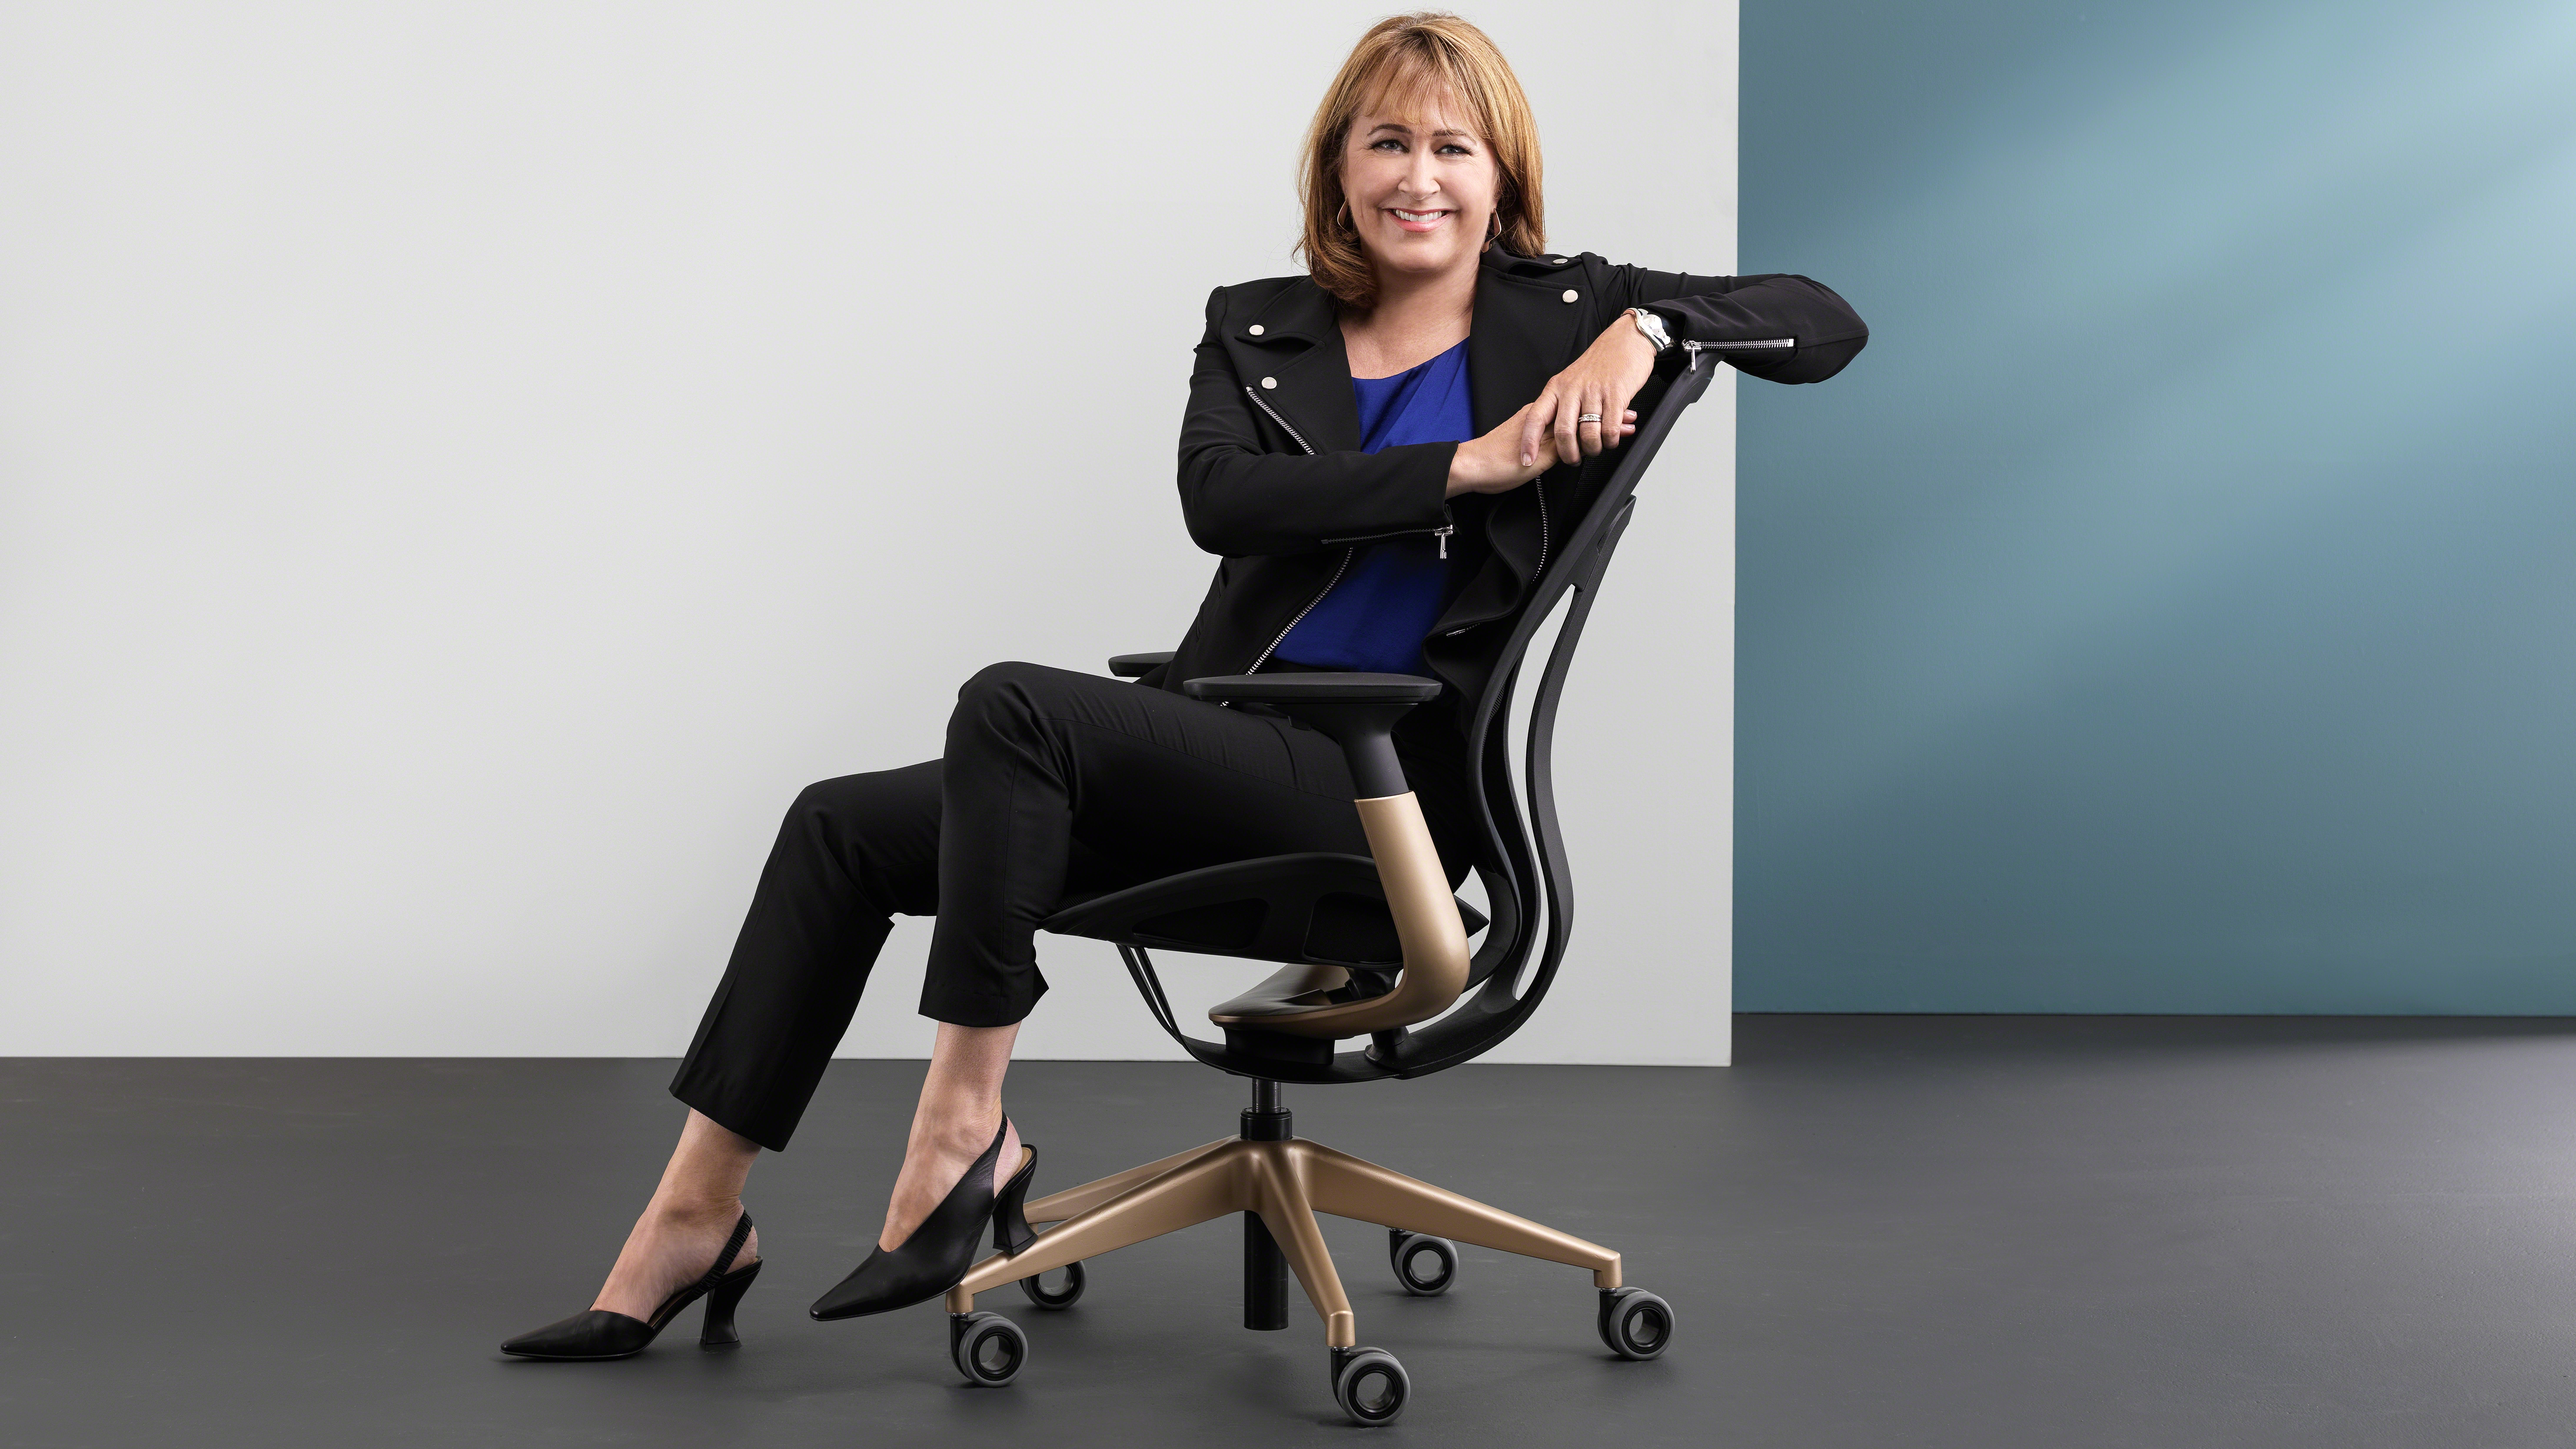 Sara Armbruster becomes Steelcase President and Chief Executive